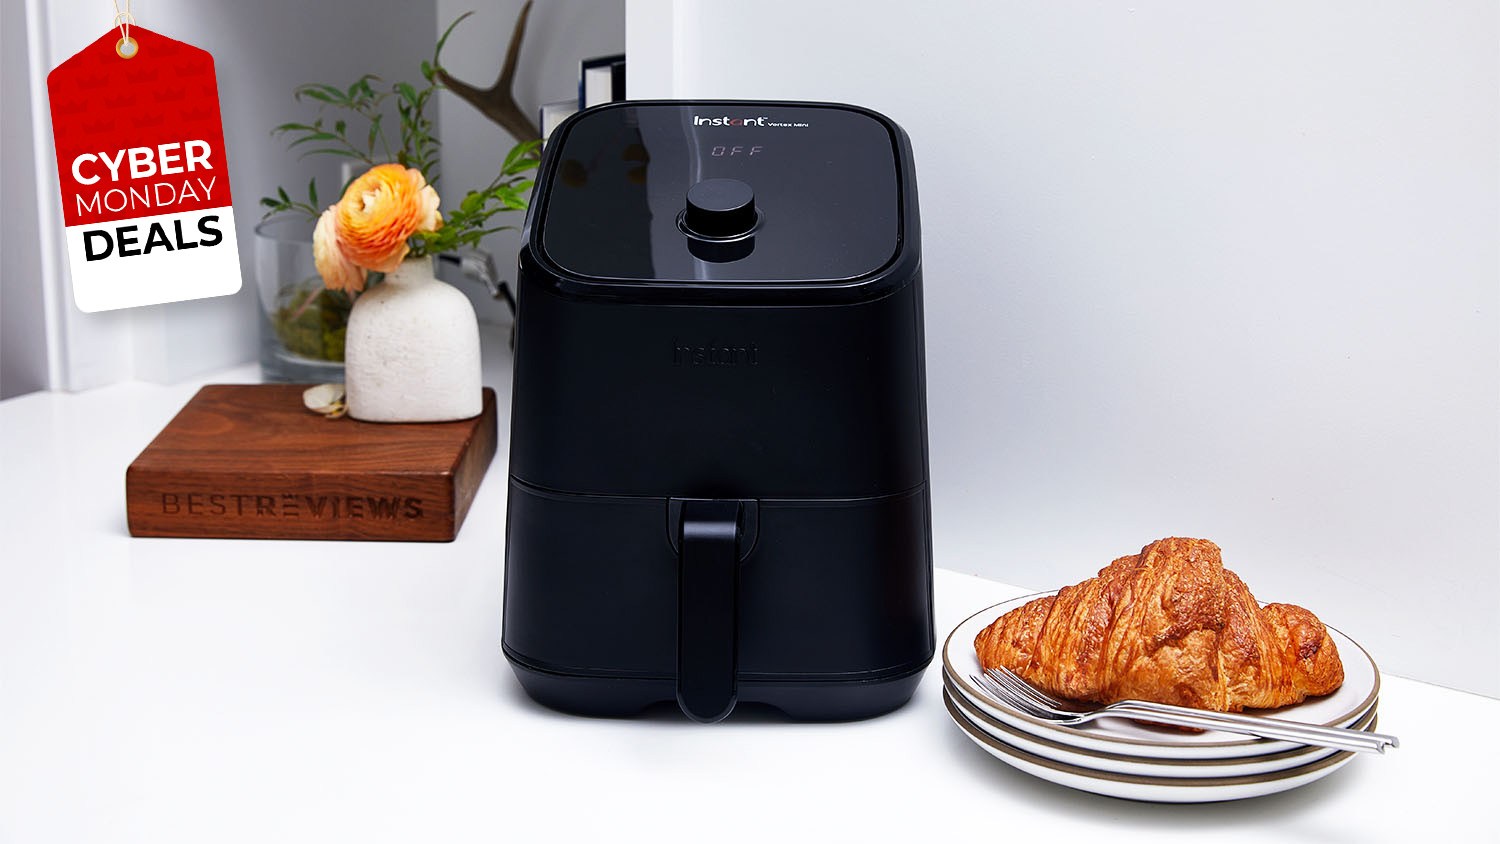 Save Over 50% on This 9-Quart Gourmia Air Fryer and Snag It for